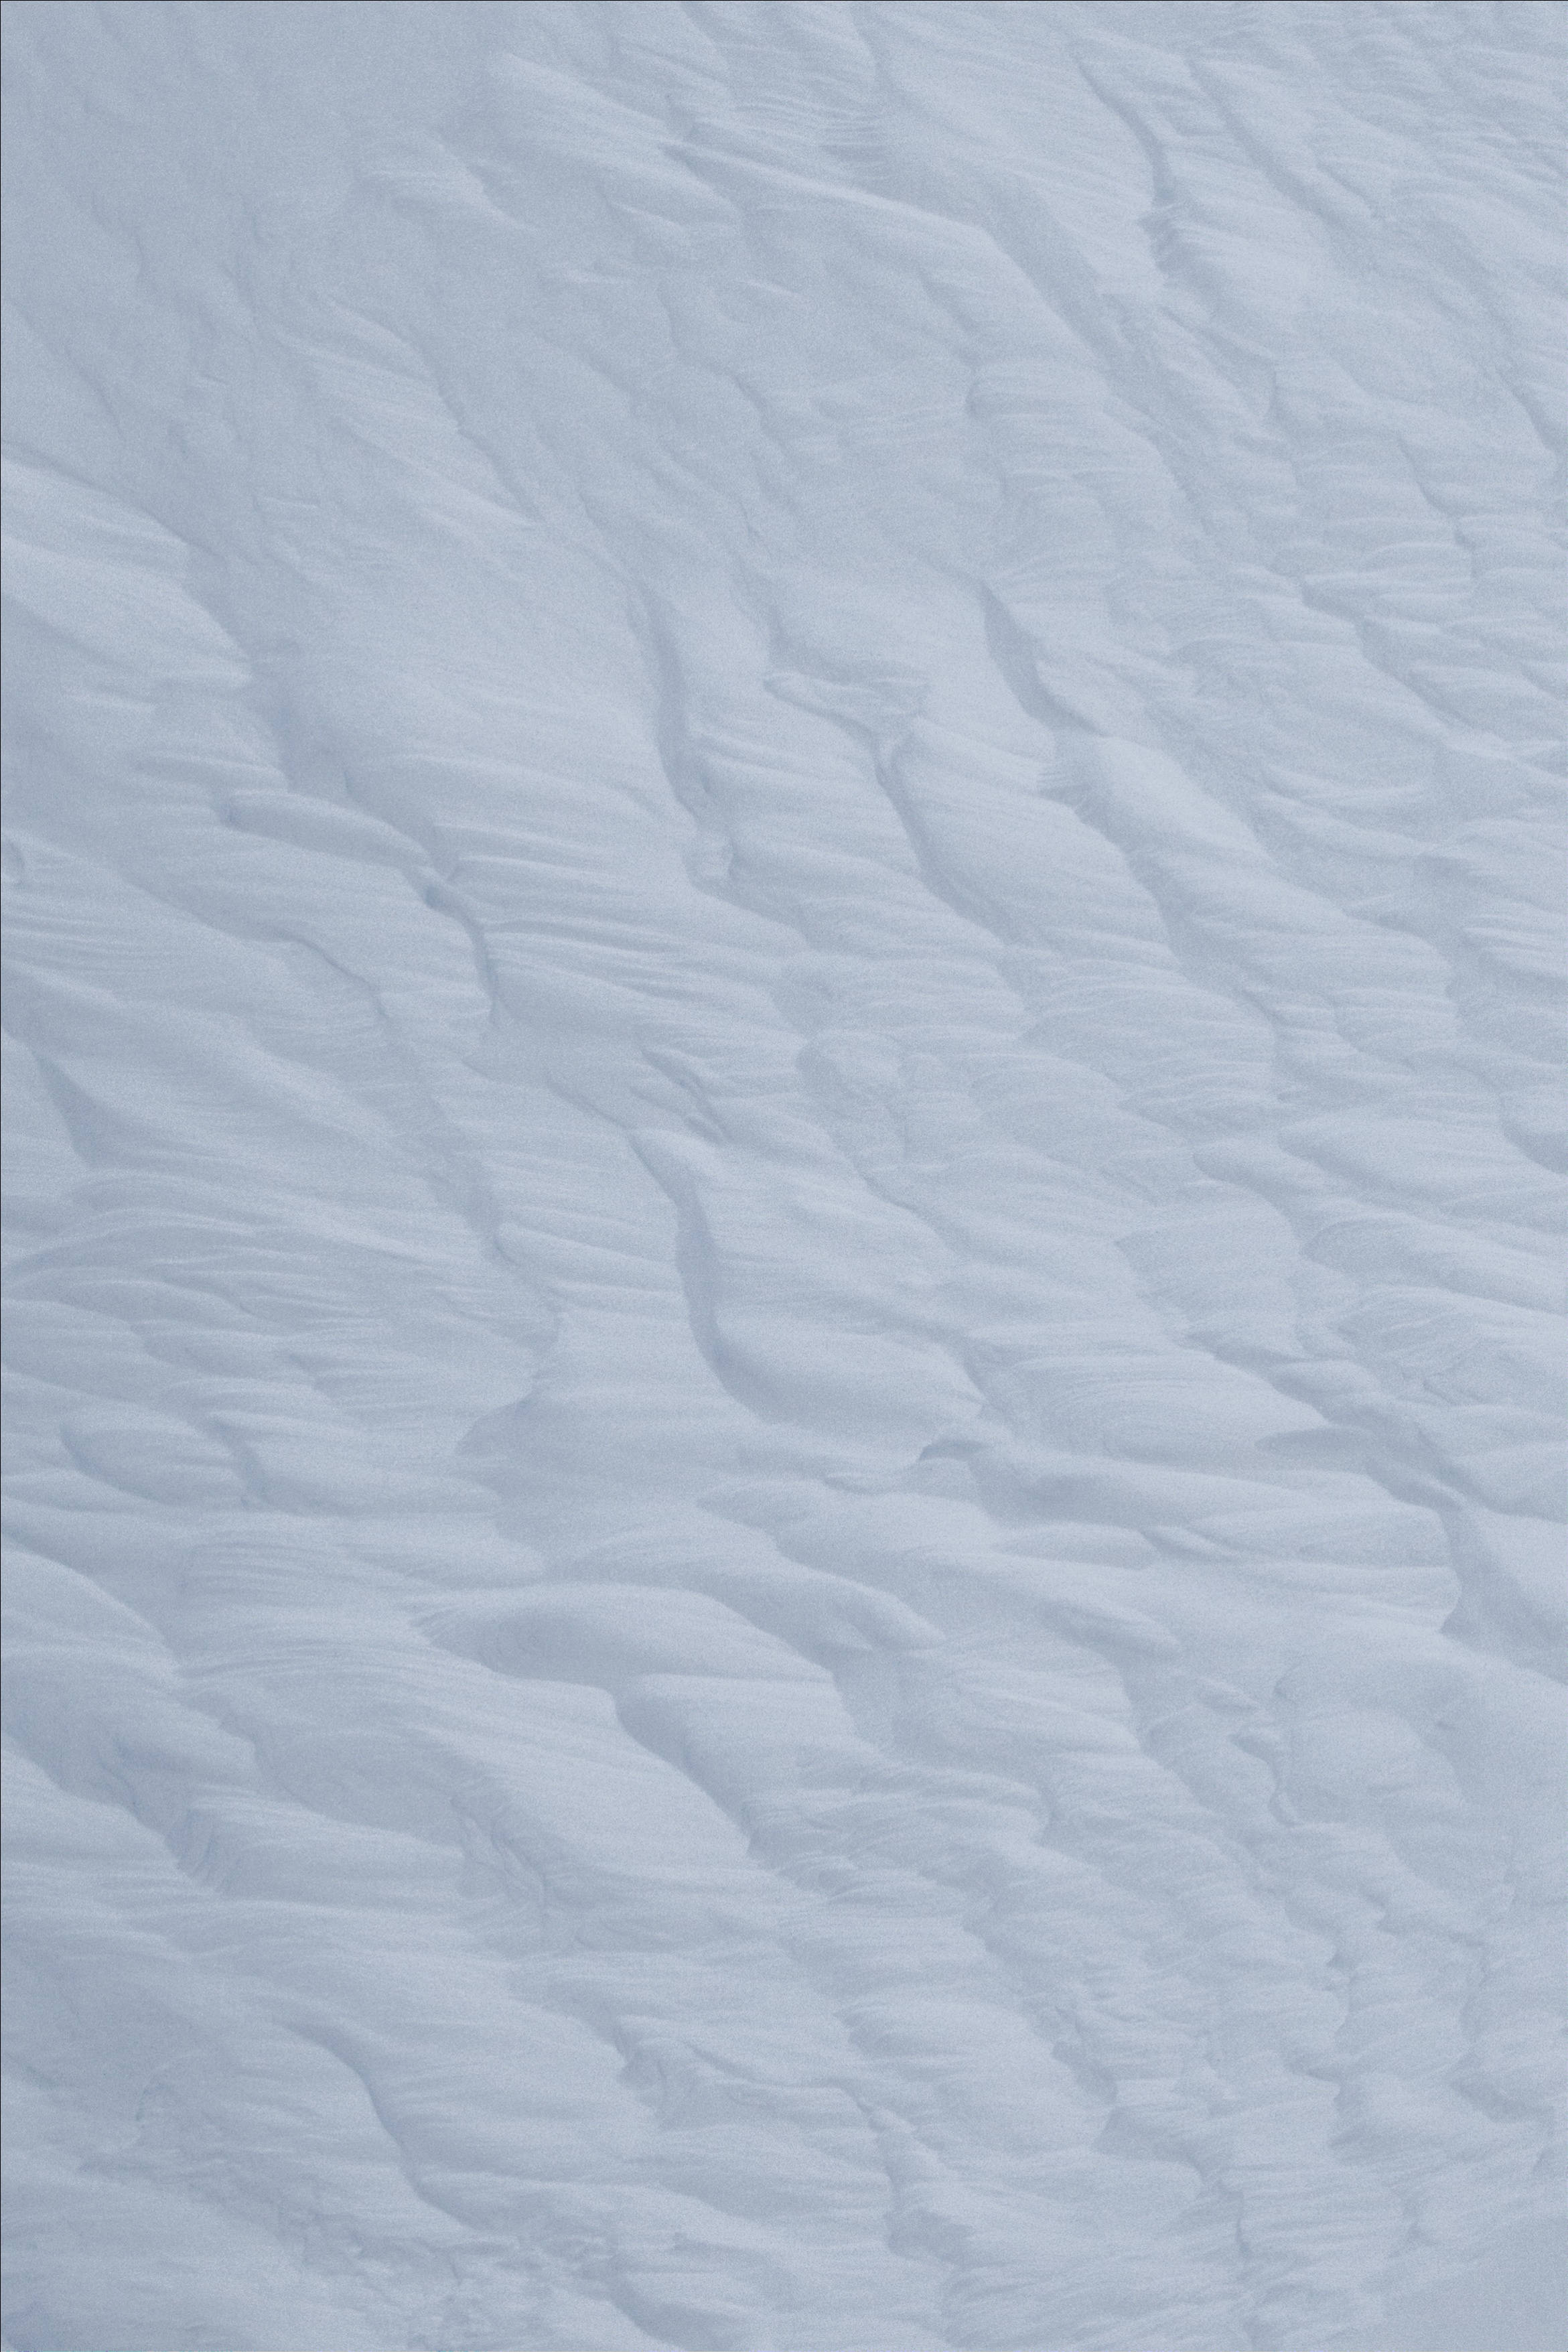 Snow, Relief, Texture, White, Gray Background